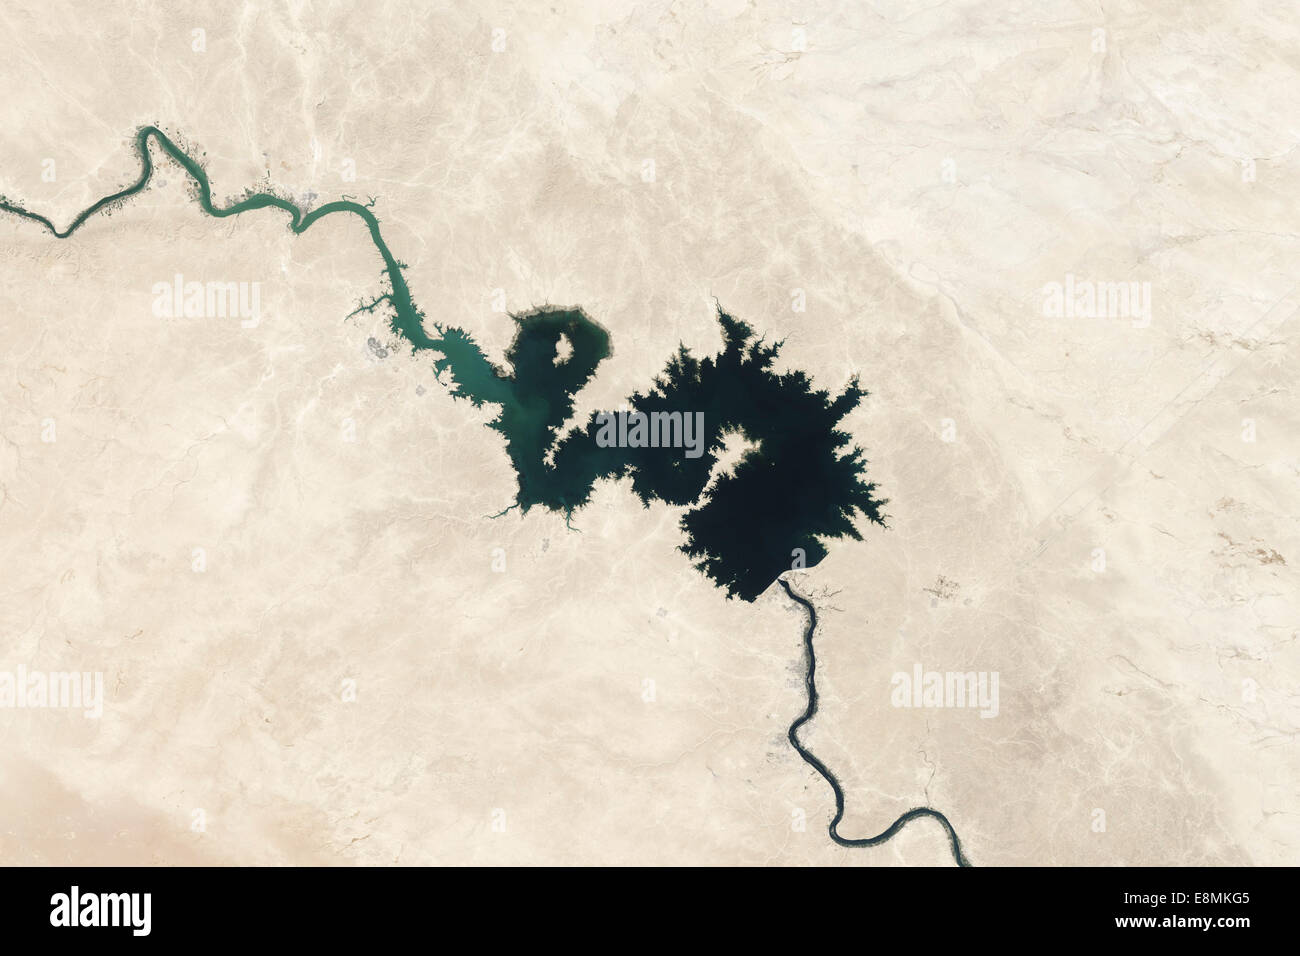 September 7, 2006 - Natural color image of Qadisiyah Reservoir in Iraq. Stock Photo